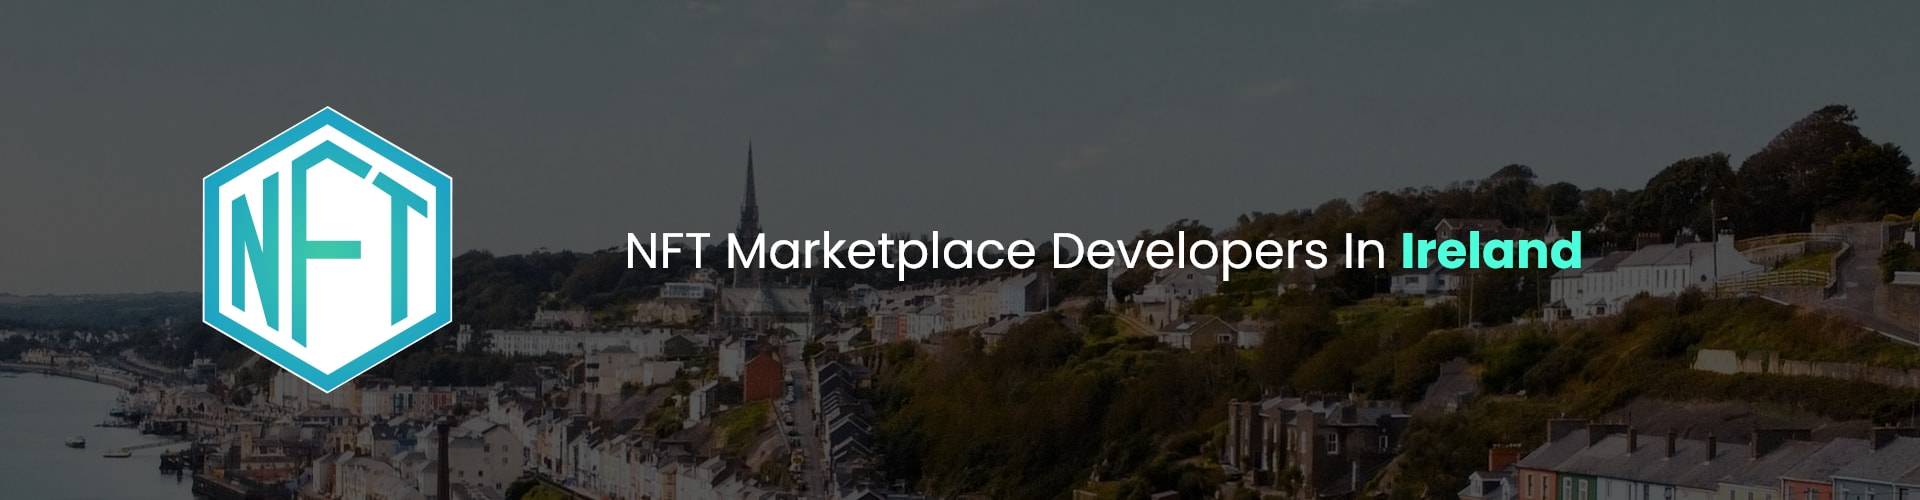 hire nft marketplace developers in ireland